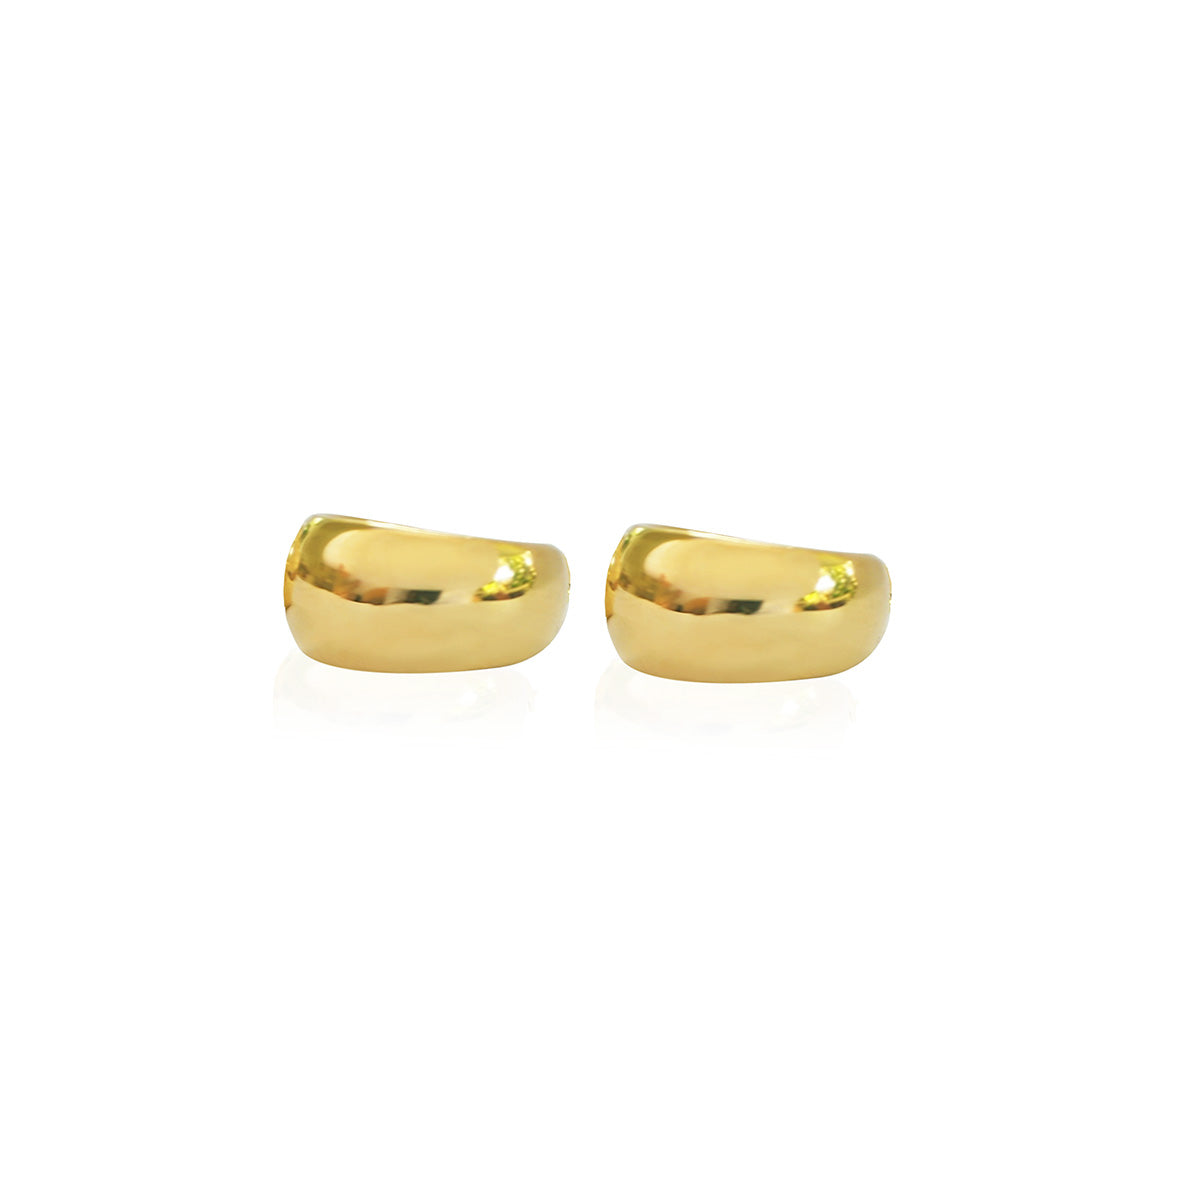 Recycled 9kt Solid Gold Smooth earrings